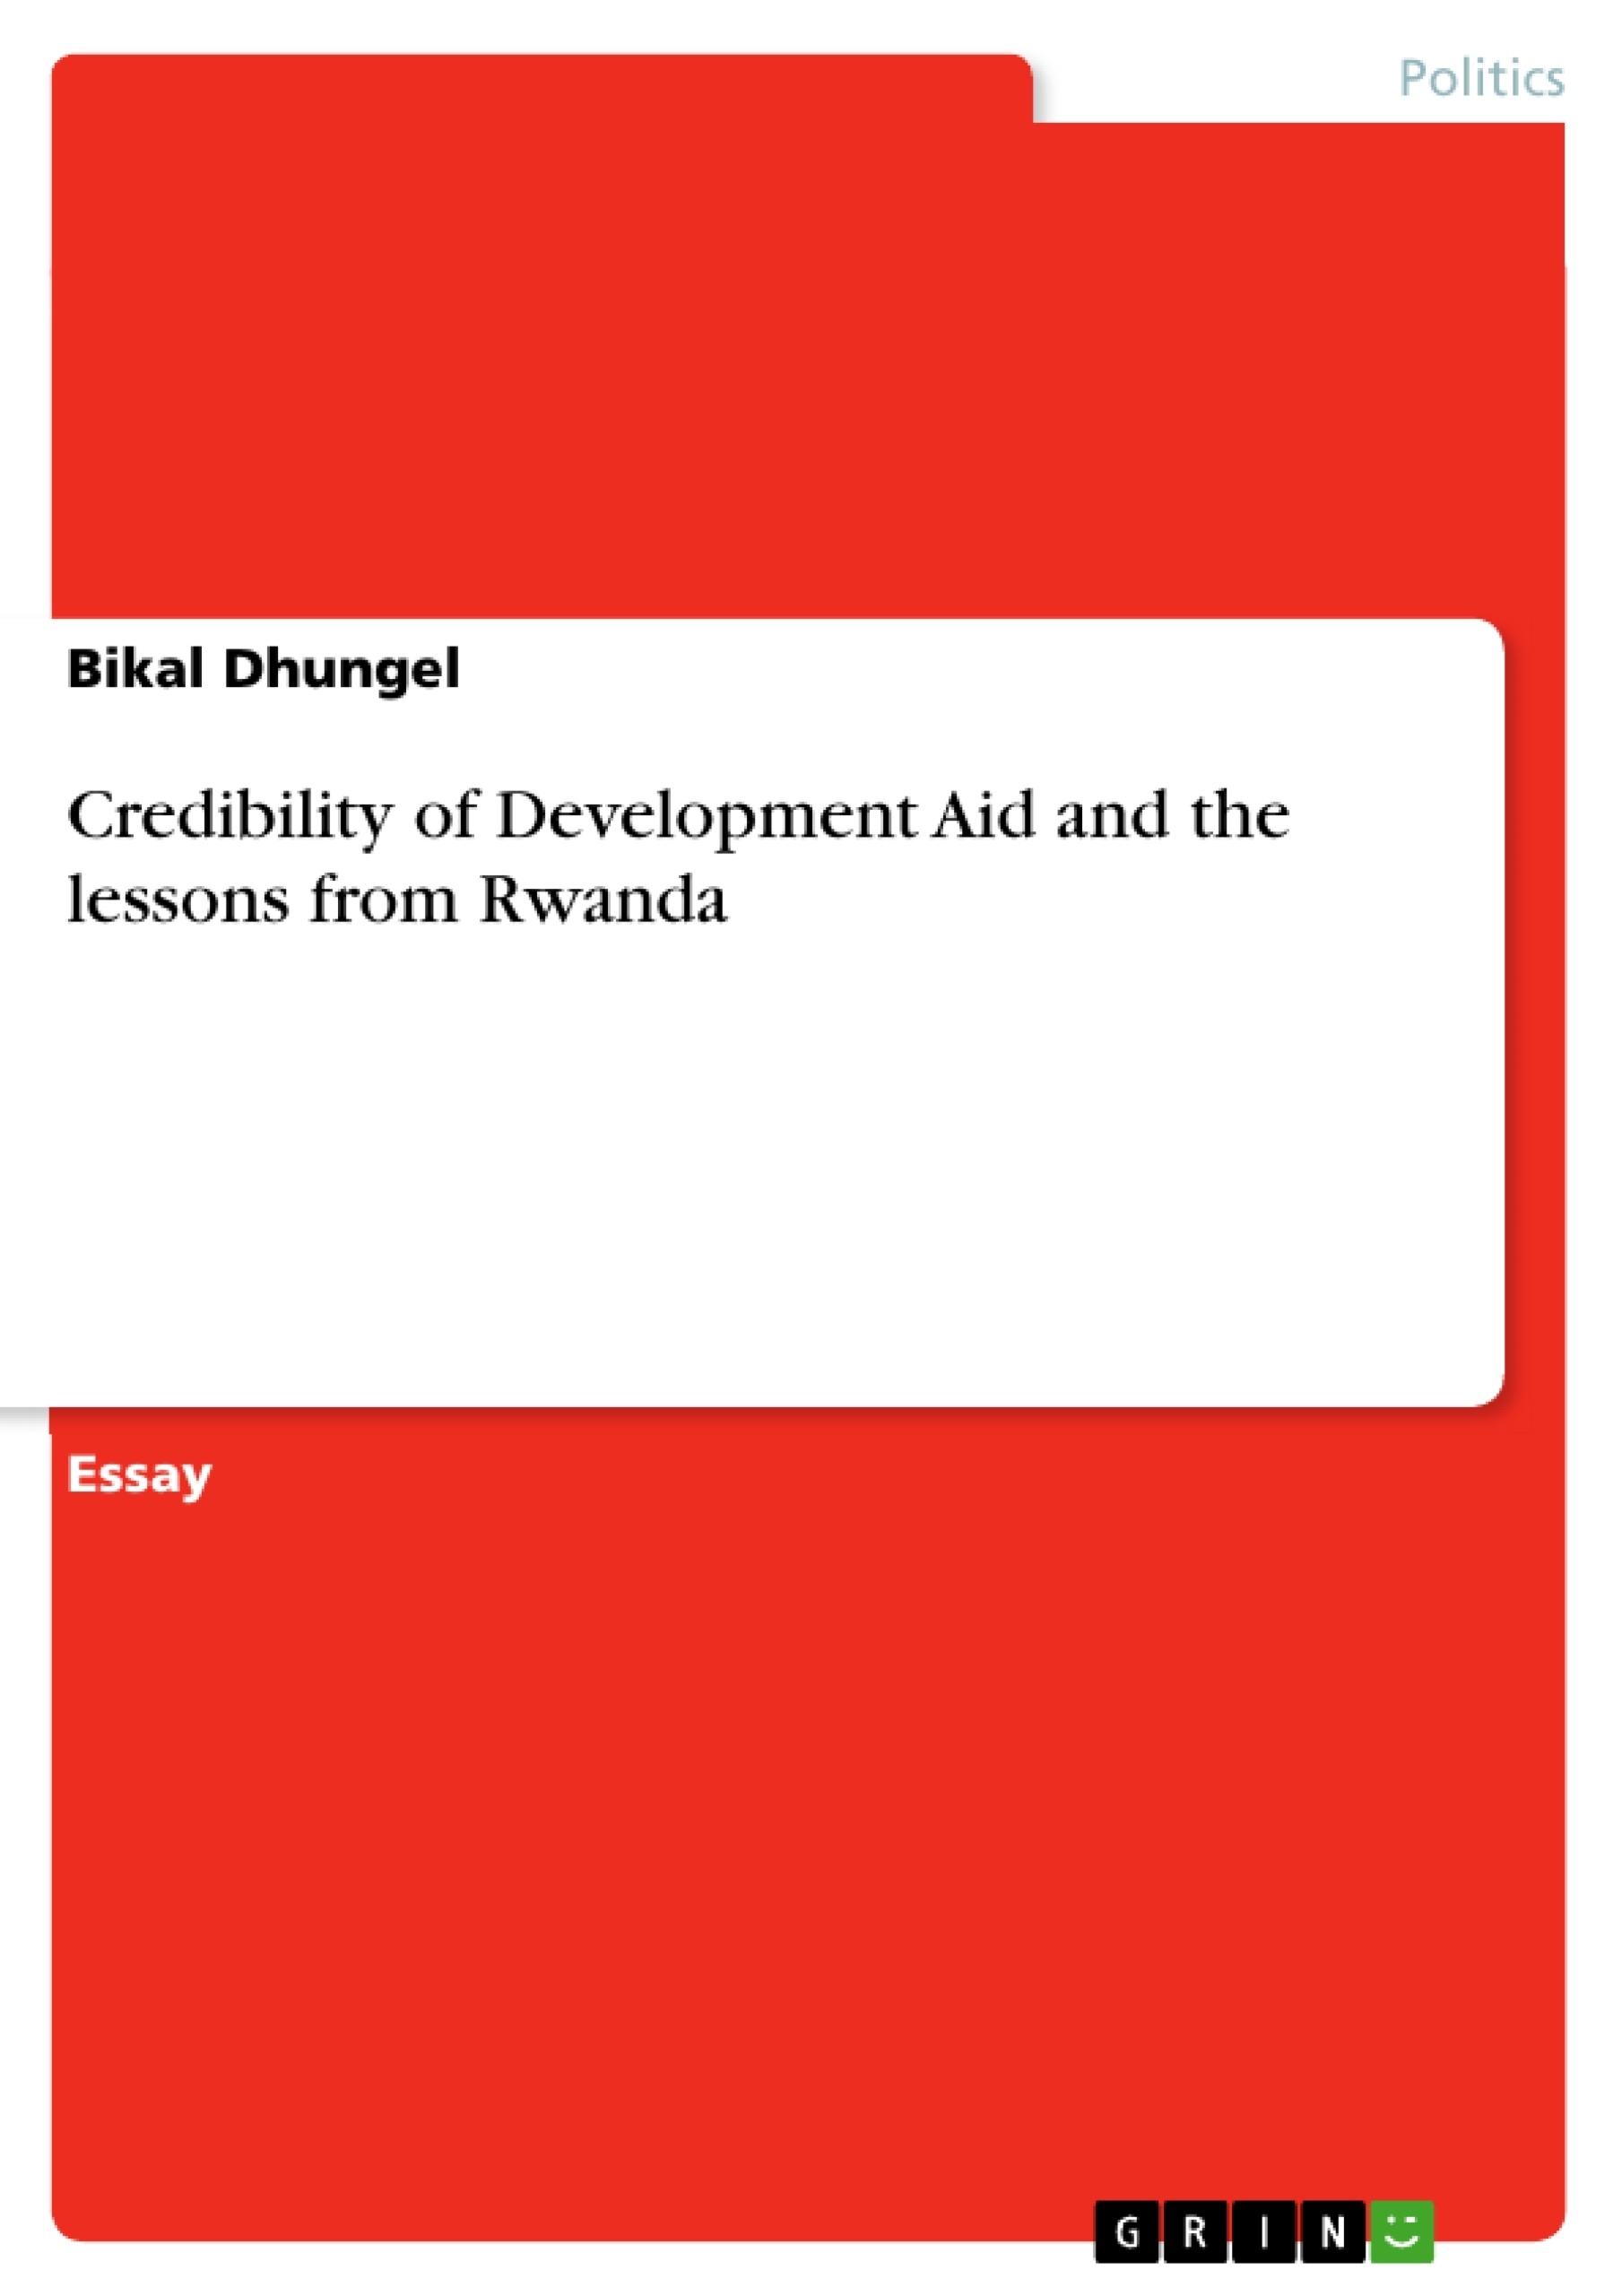 Titre: Credibility of Development Aid and the lessons from Rwanda